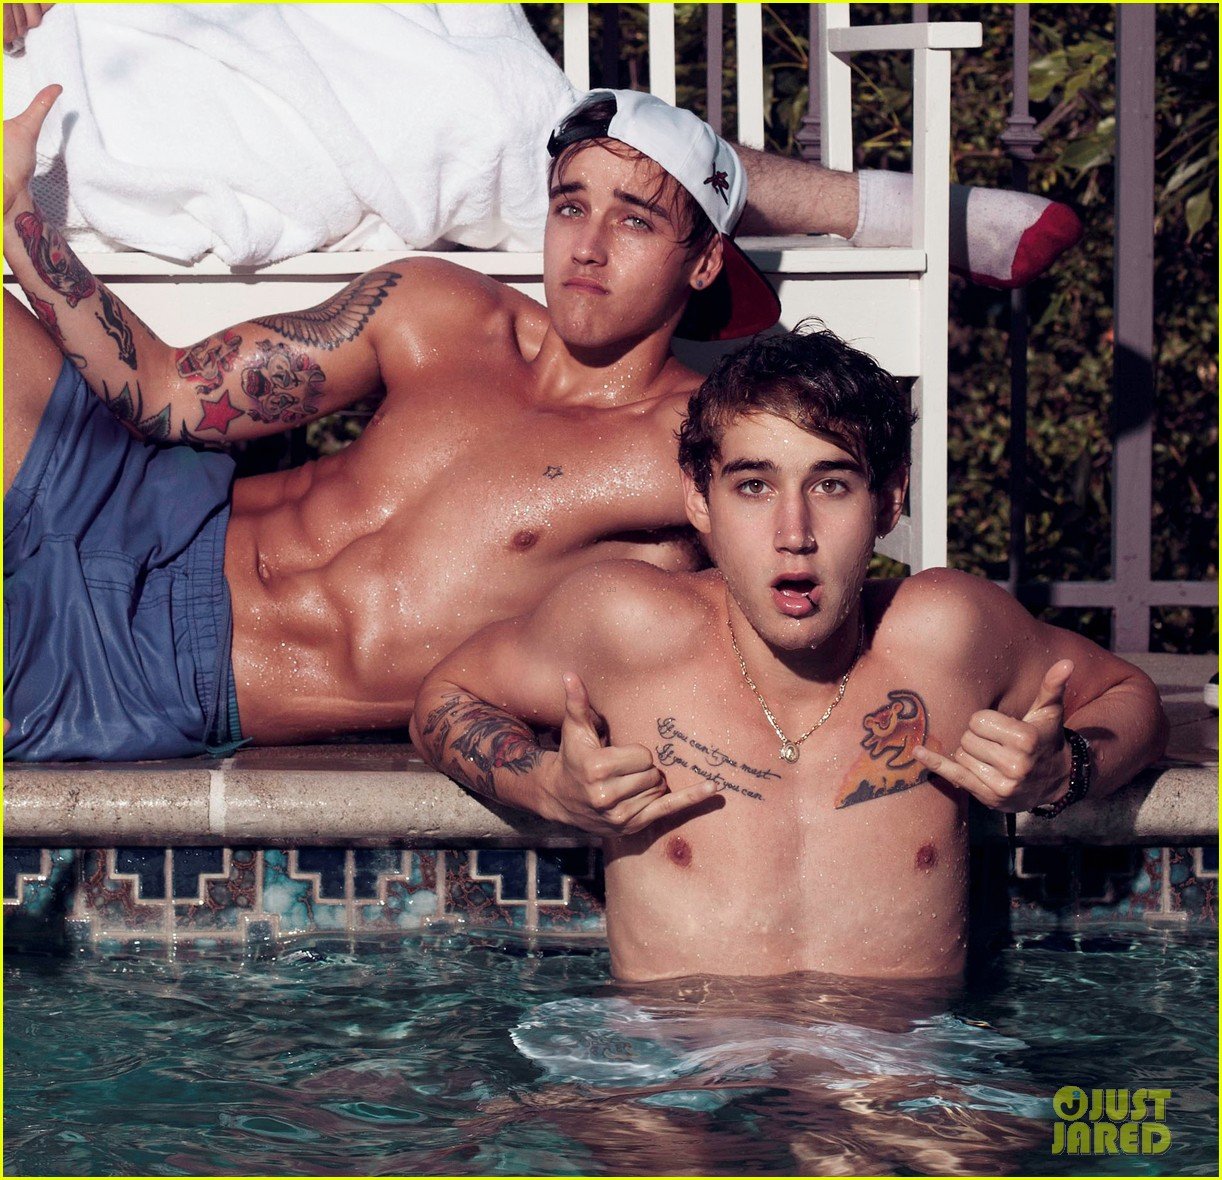 We have some exciting news - hit band The Janoskians have officially partne...